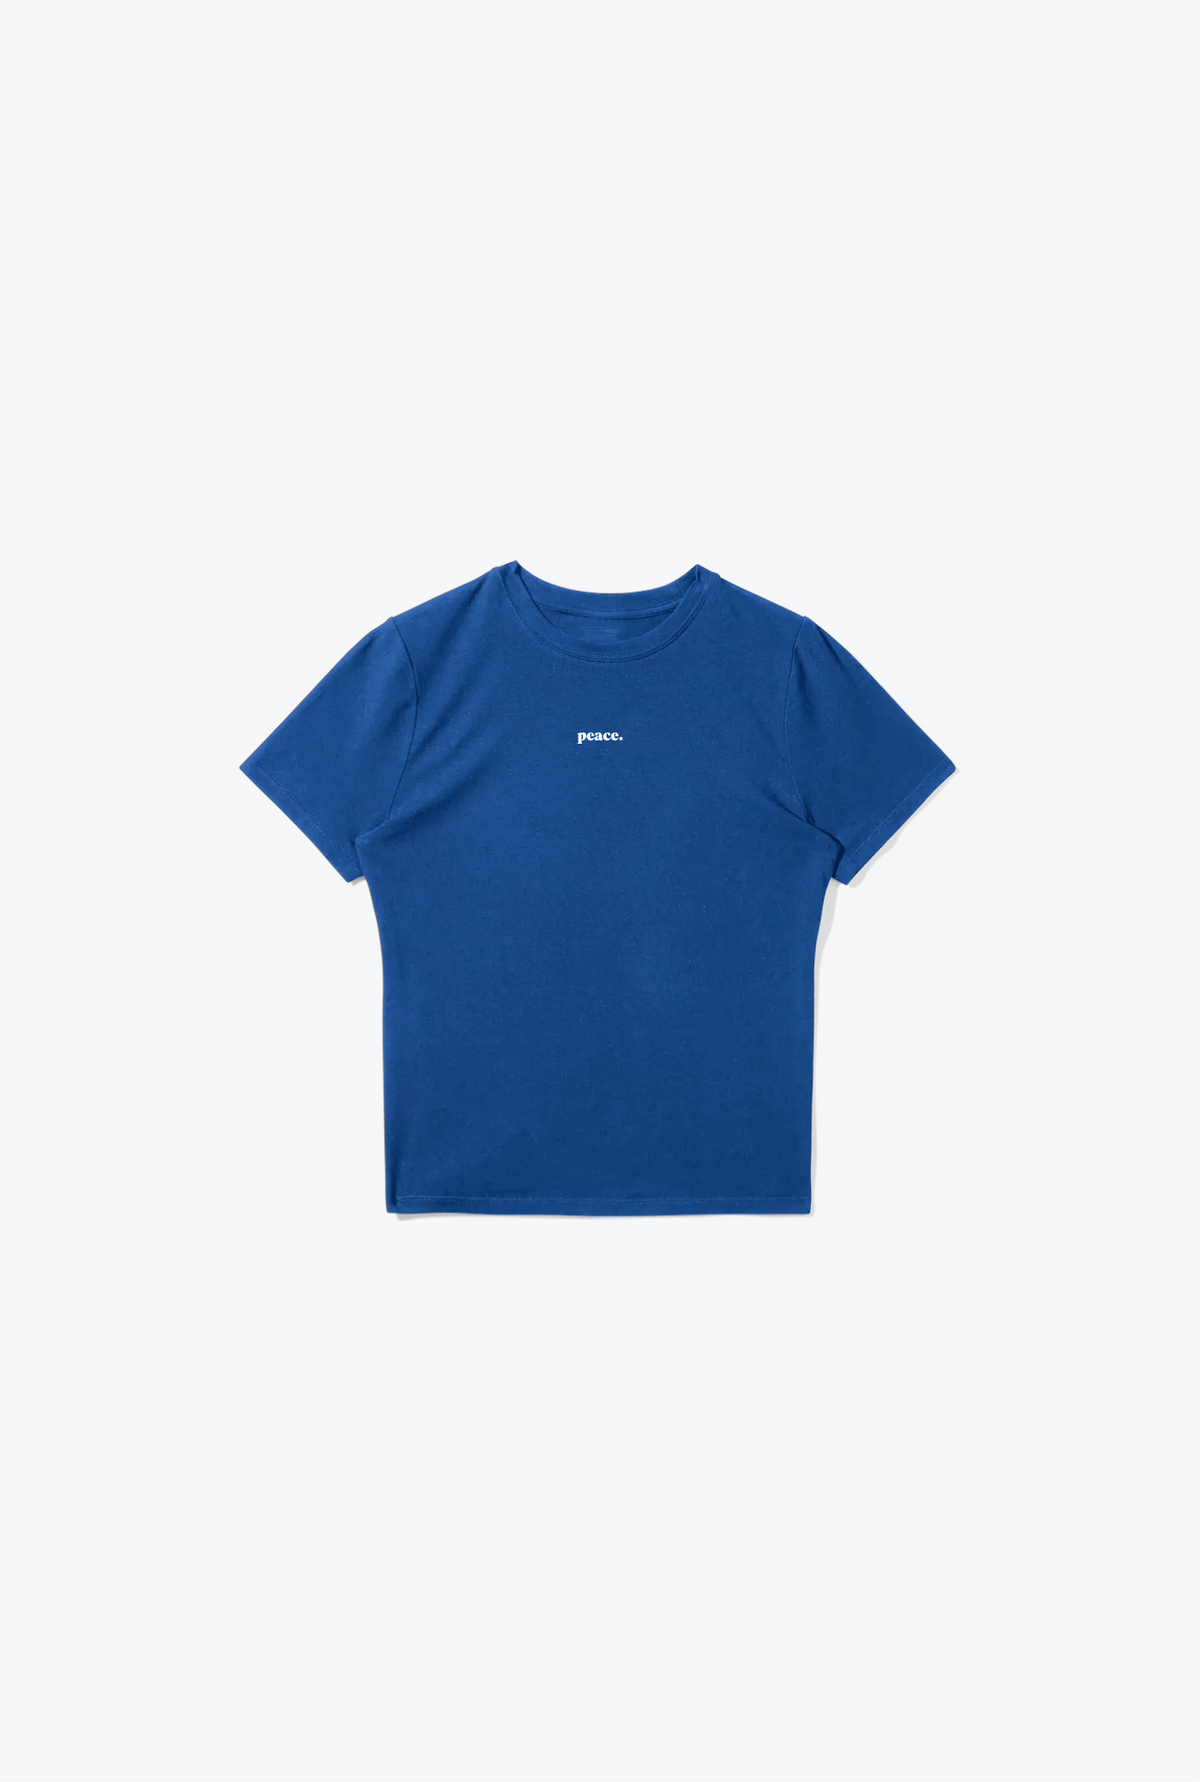 Peace Baby Tee - Strong Blue